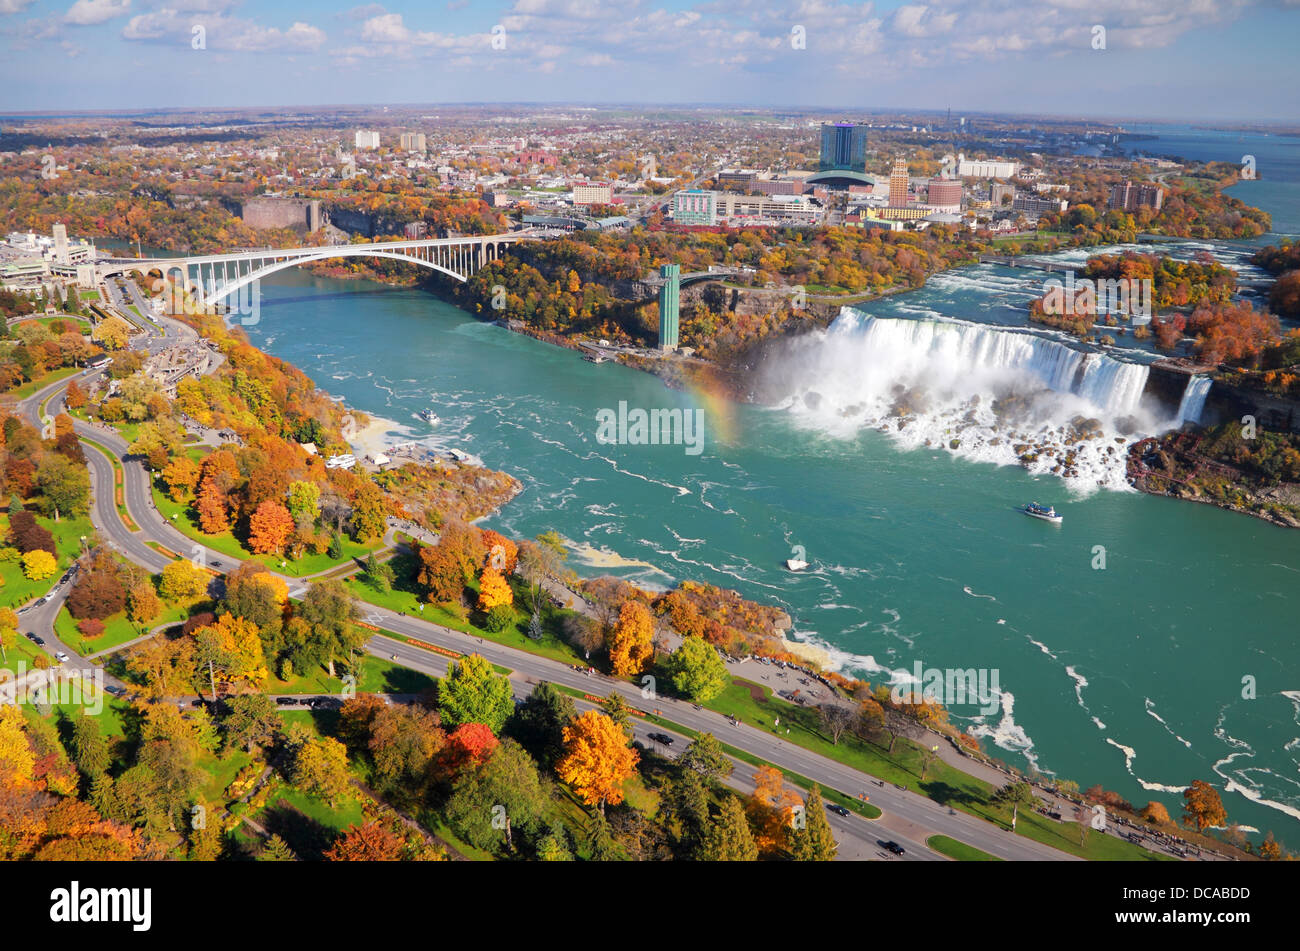 Scenic aerial view of American Falls and Niagara River with Rainbow Bridge connecting Ontario and New York State Stock Photo